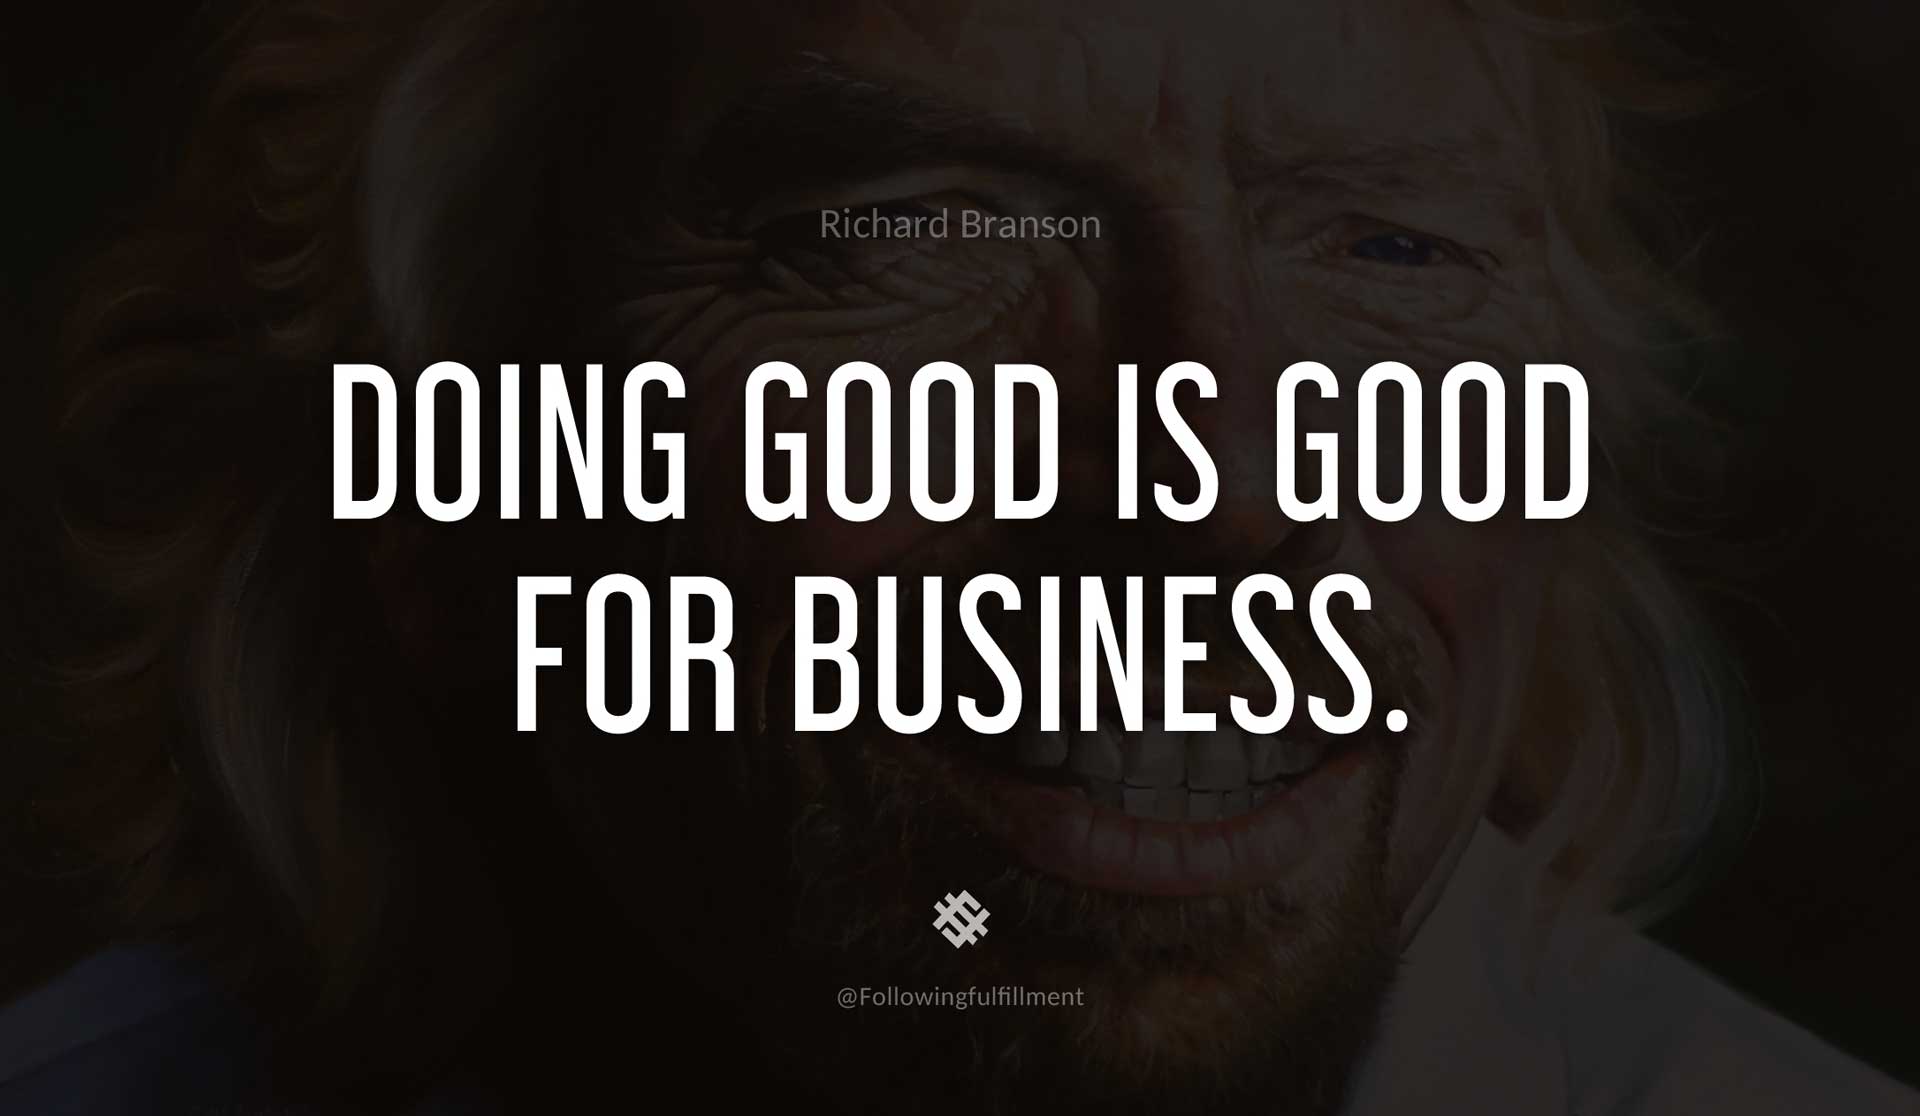 Doing-good-is-good-for-business.-RICHARD-BRANSON-Quote.jpg